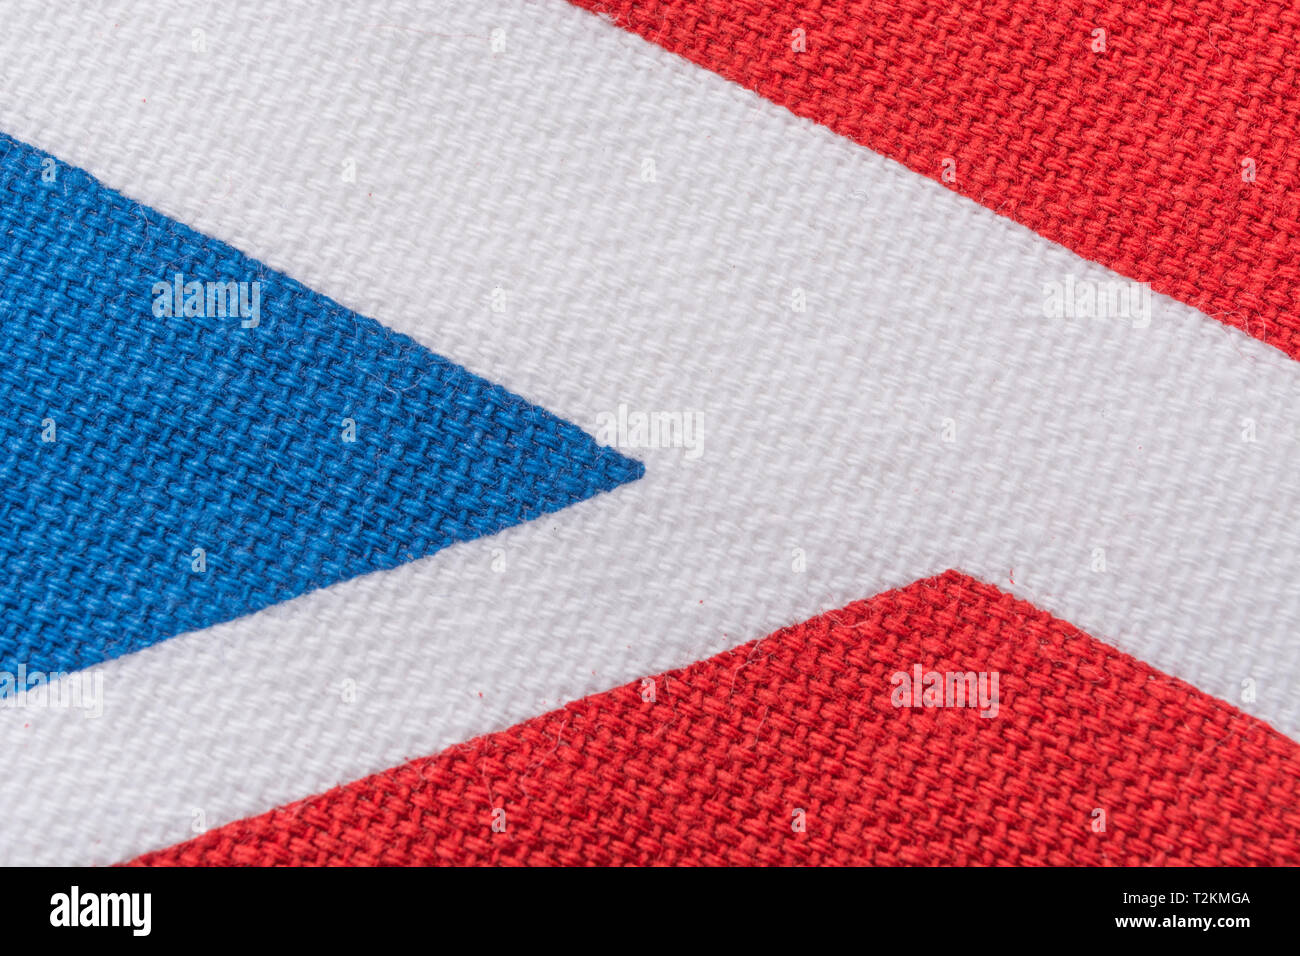 Close-up macro of Union Jack printed cotton material, showing colourful threads, warp and weft pattern, regular rows of stitches, Union Jack abstract. Stock Photo